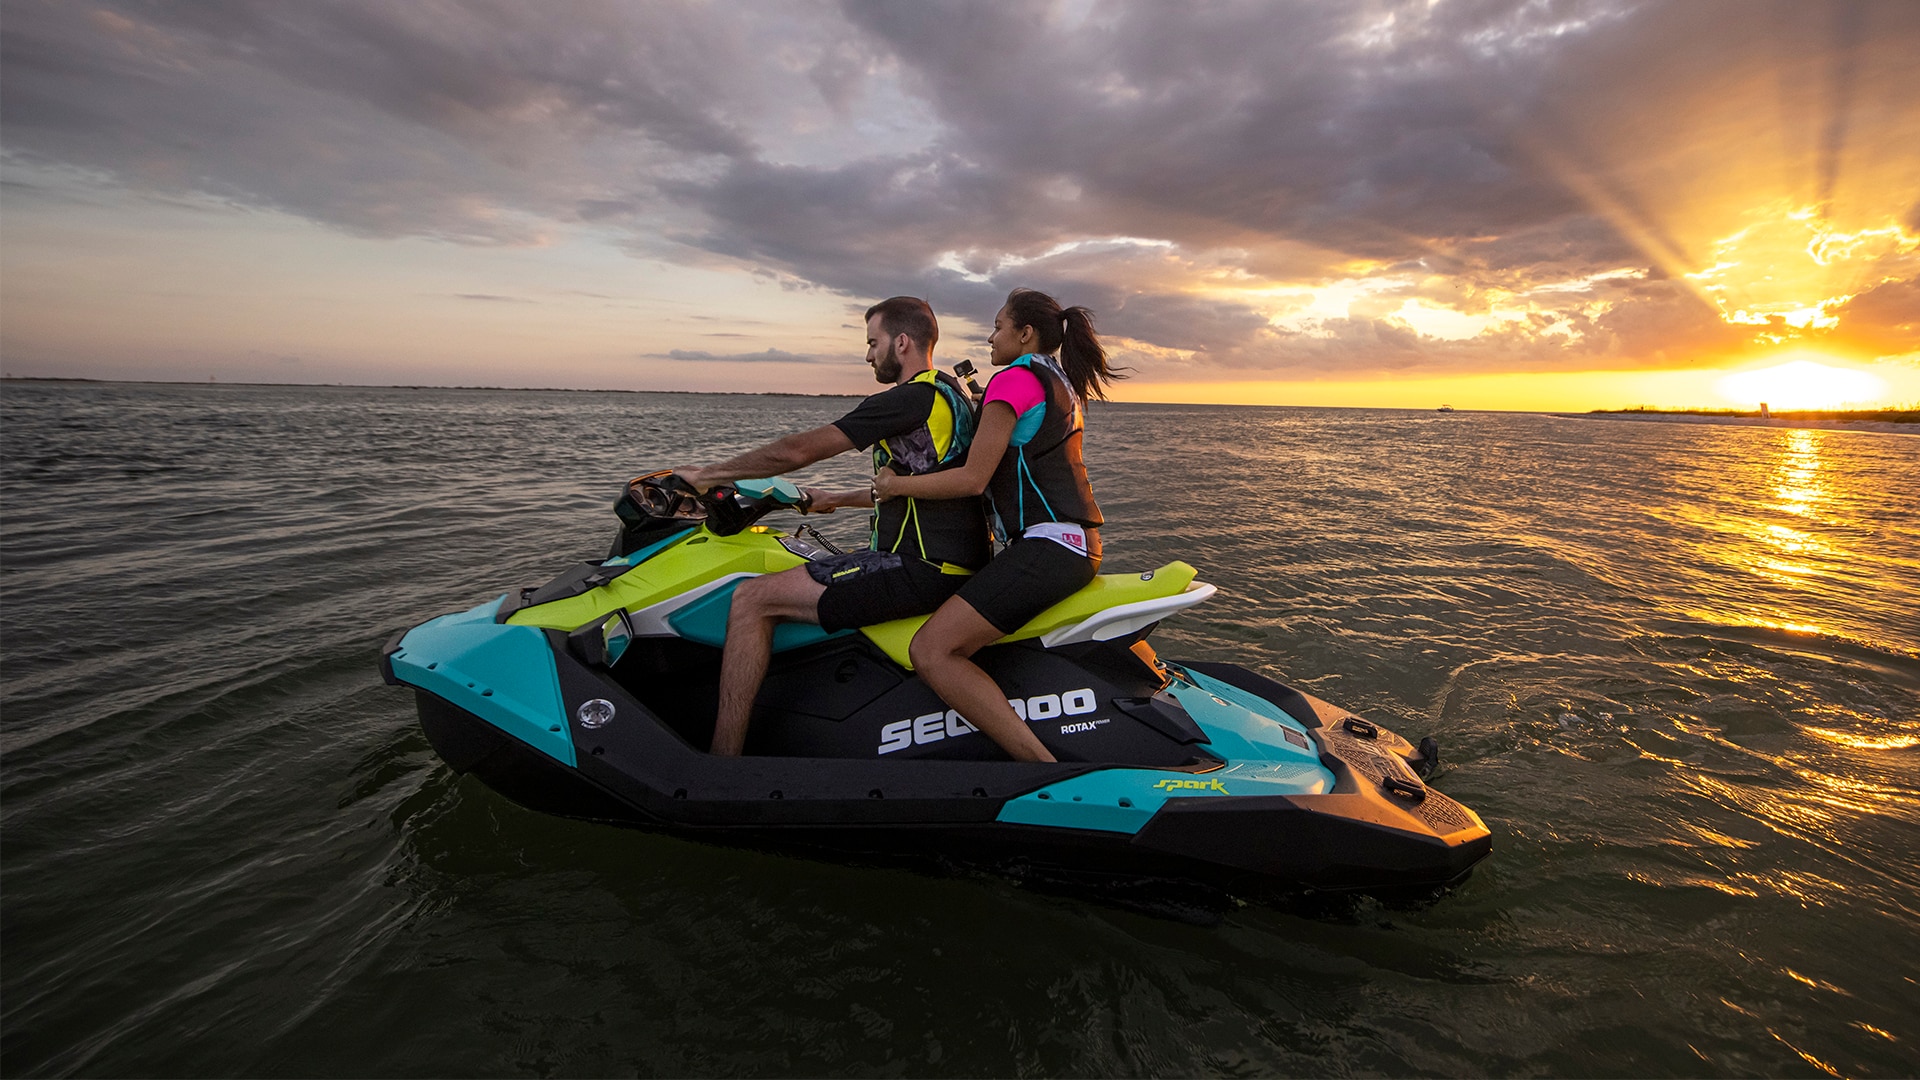 Couple idling by in the middle of a body of water on a Sea-Doo Spark PWC